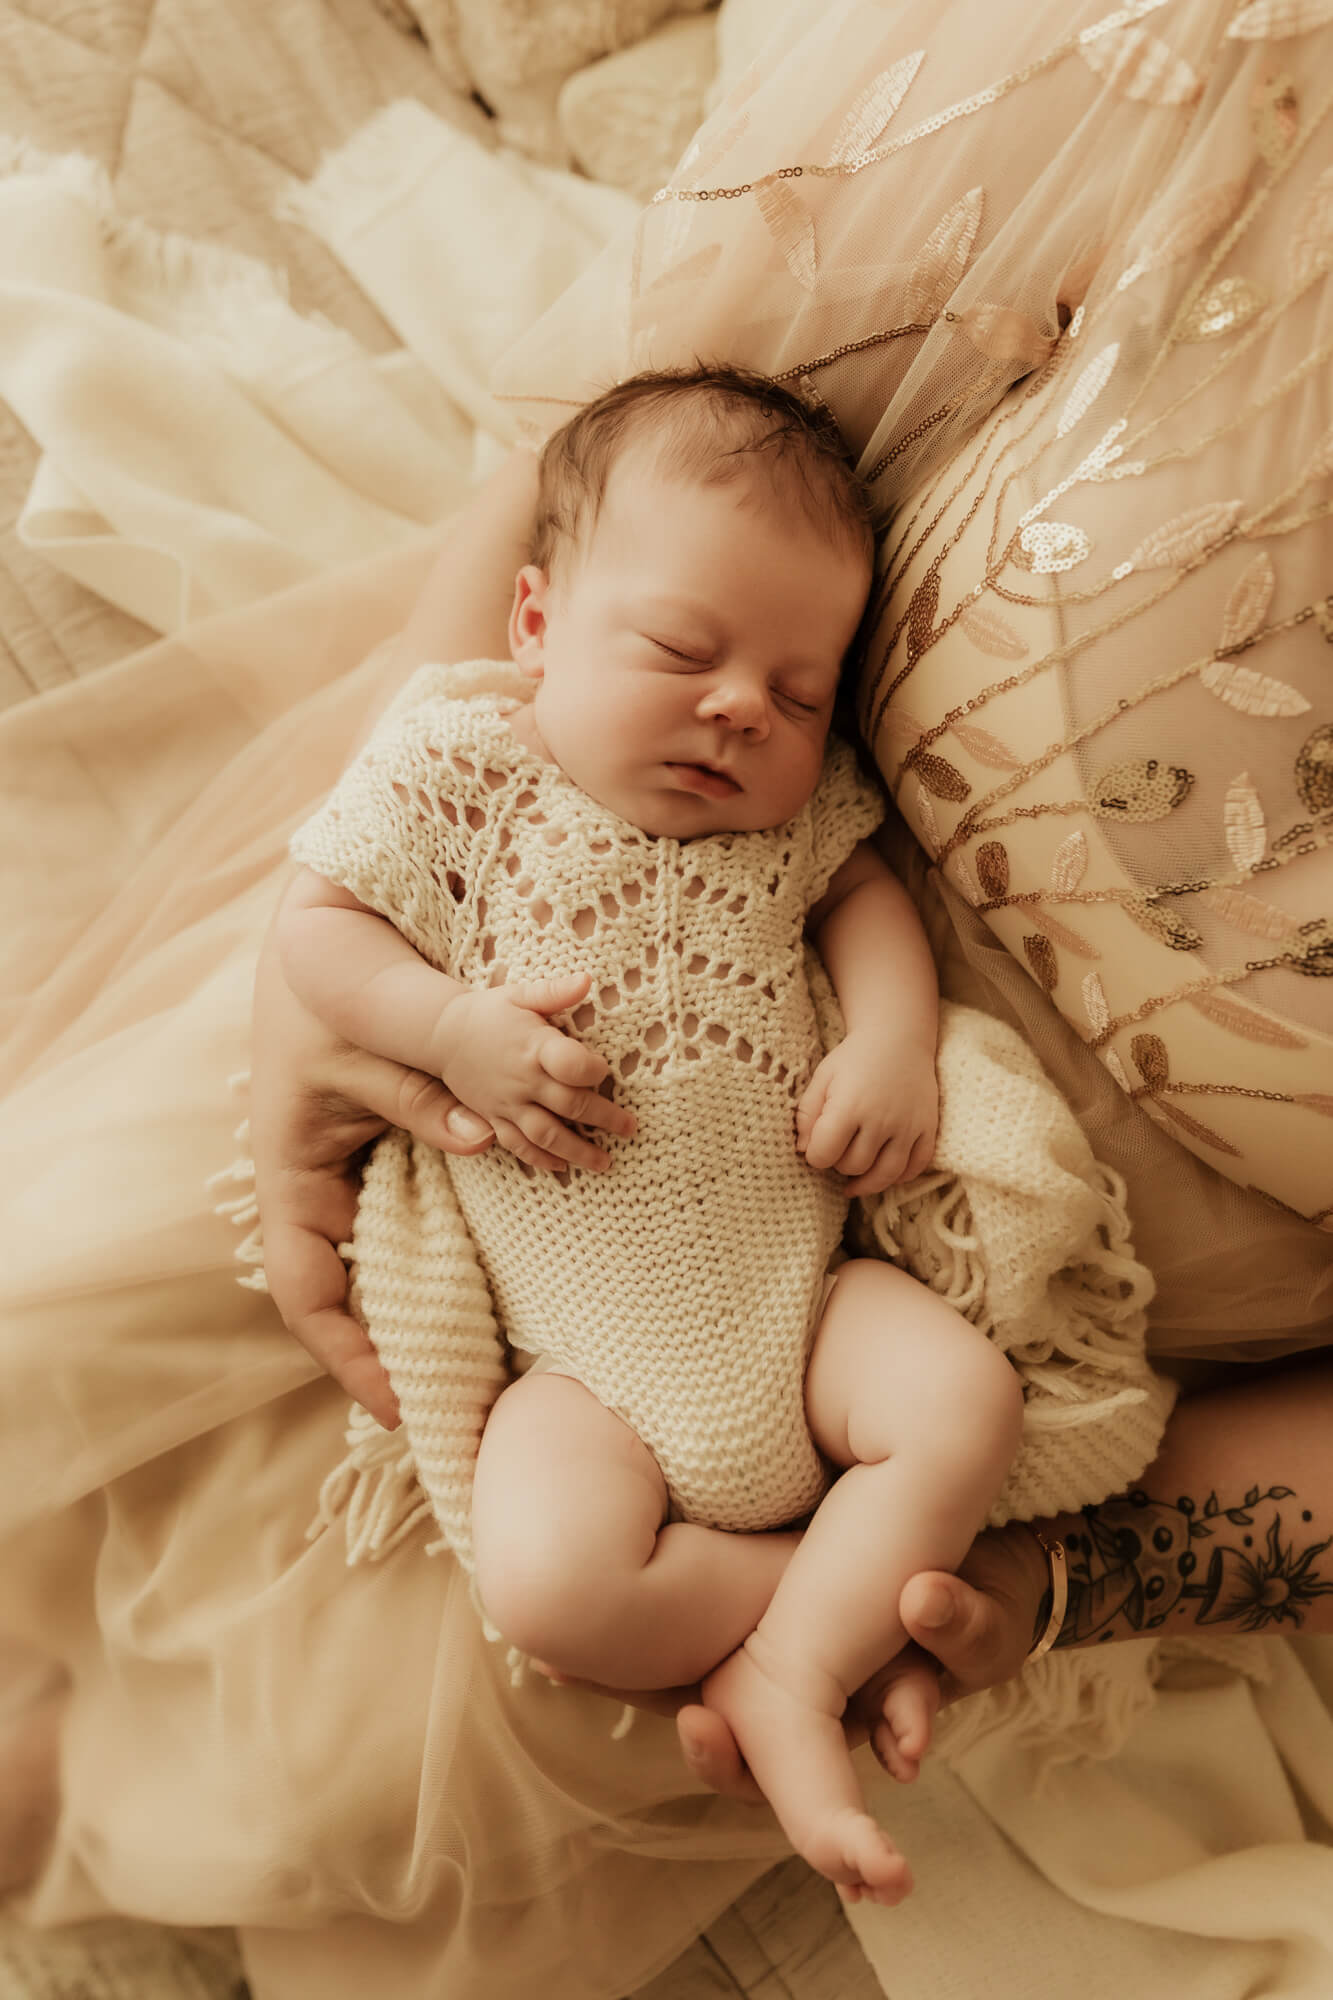 Newborn baby girl wearing a cream knit romper sleeps in her mother's arms, Perinatal Center of Oklahoma.